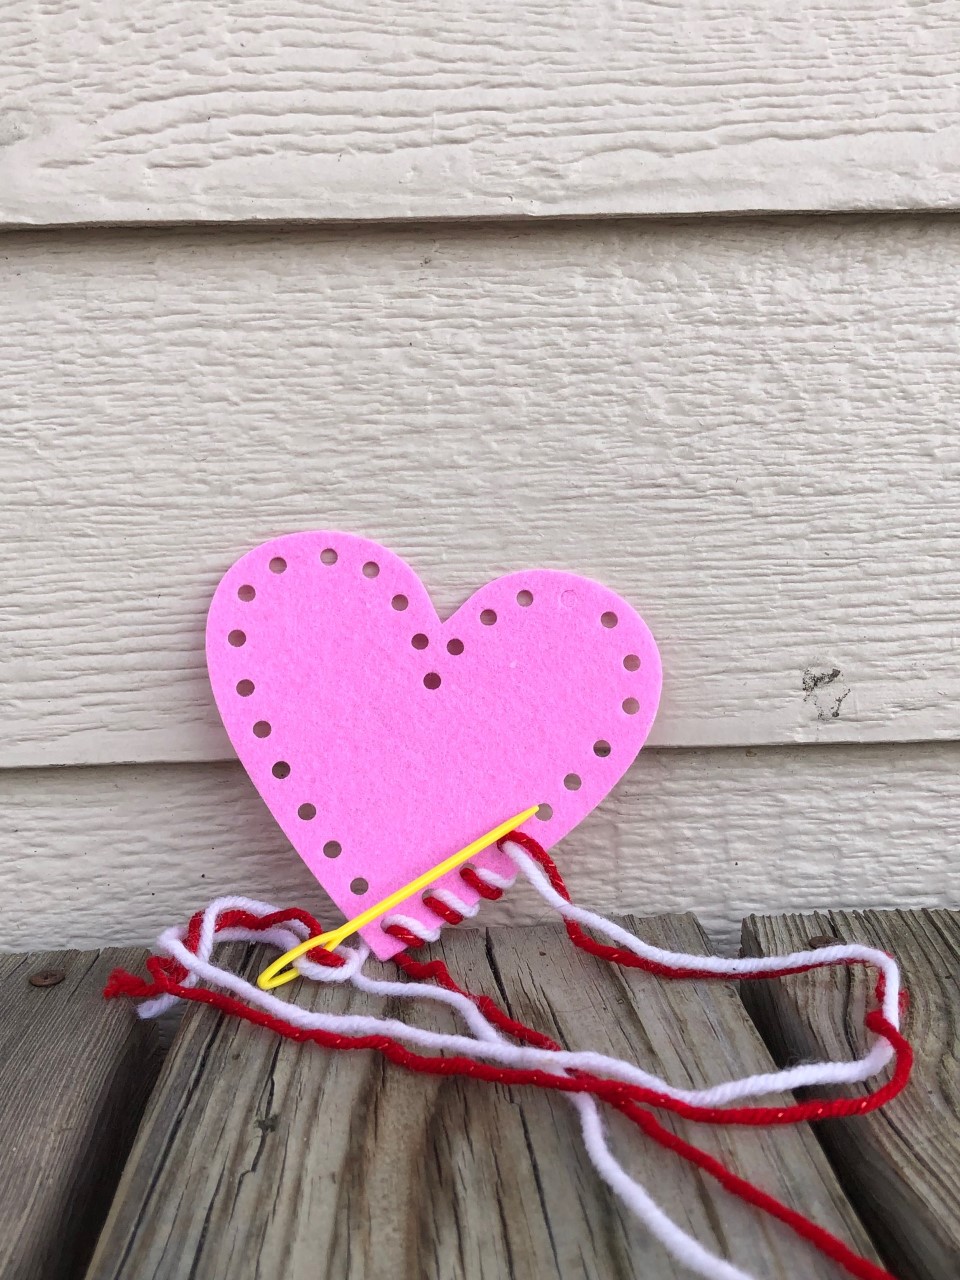 Pink heart with yarn border